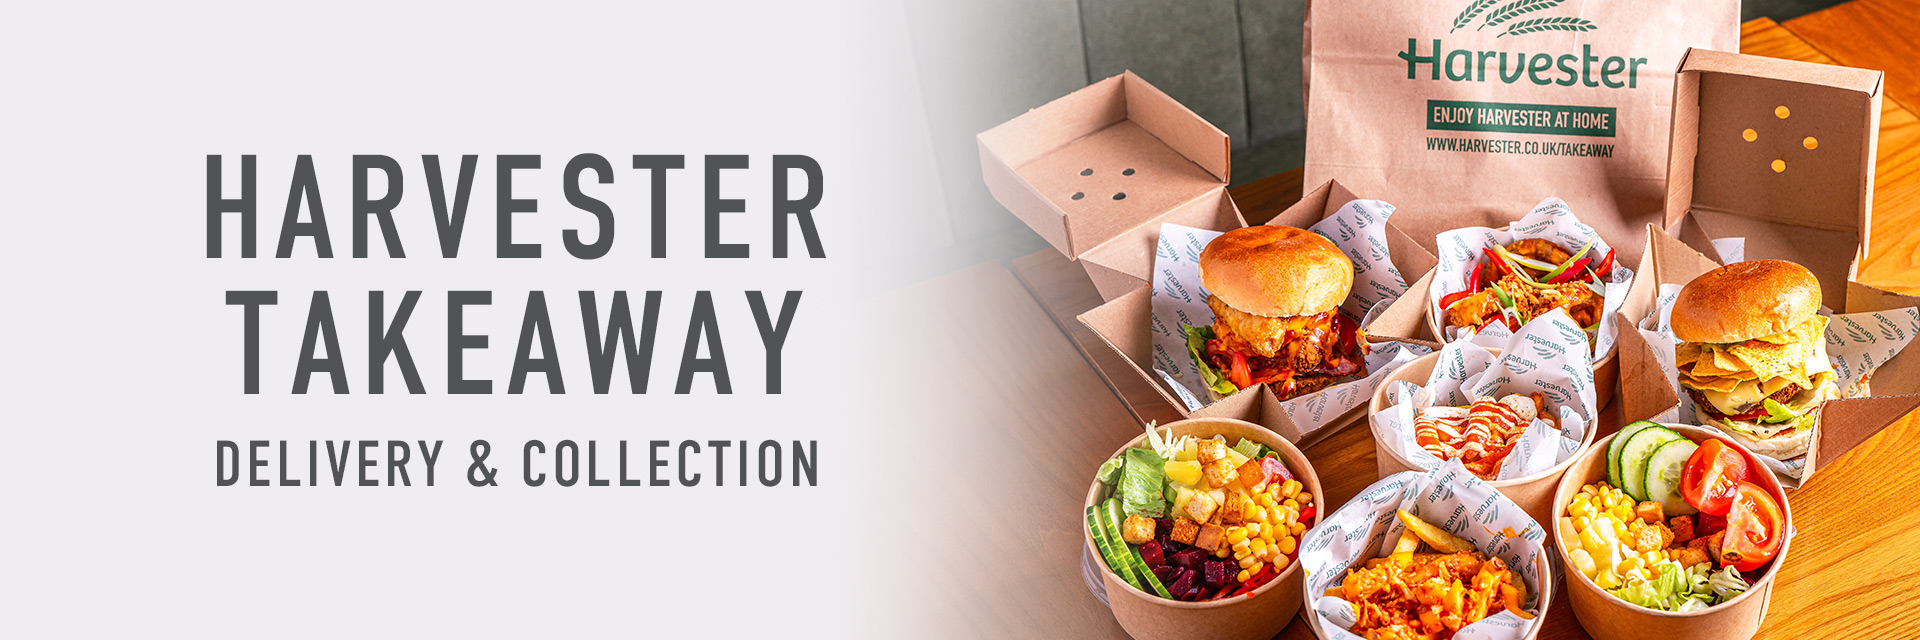 Harvester Grays takeaway, delivery, collection